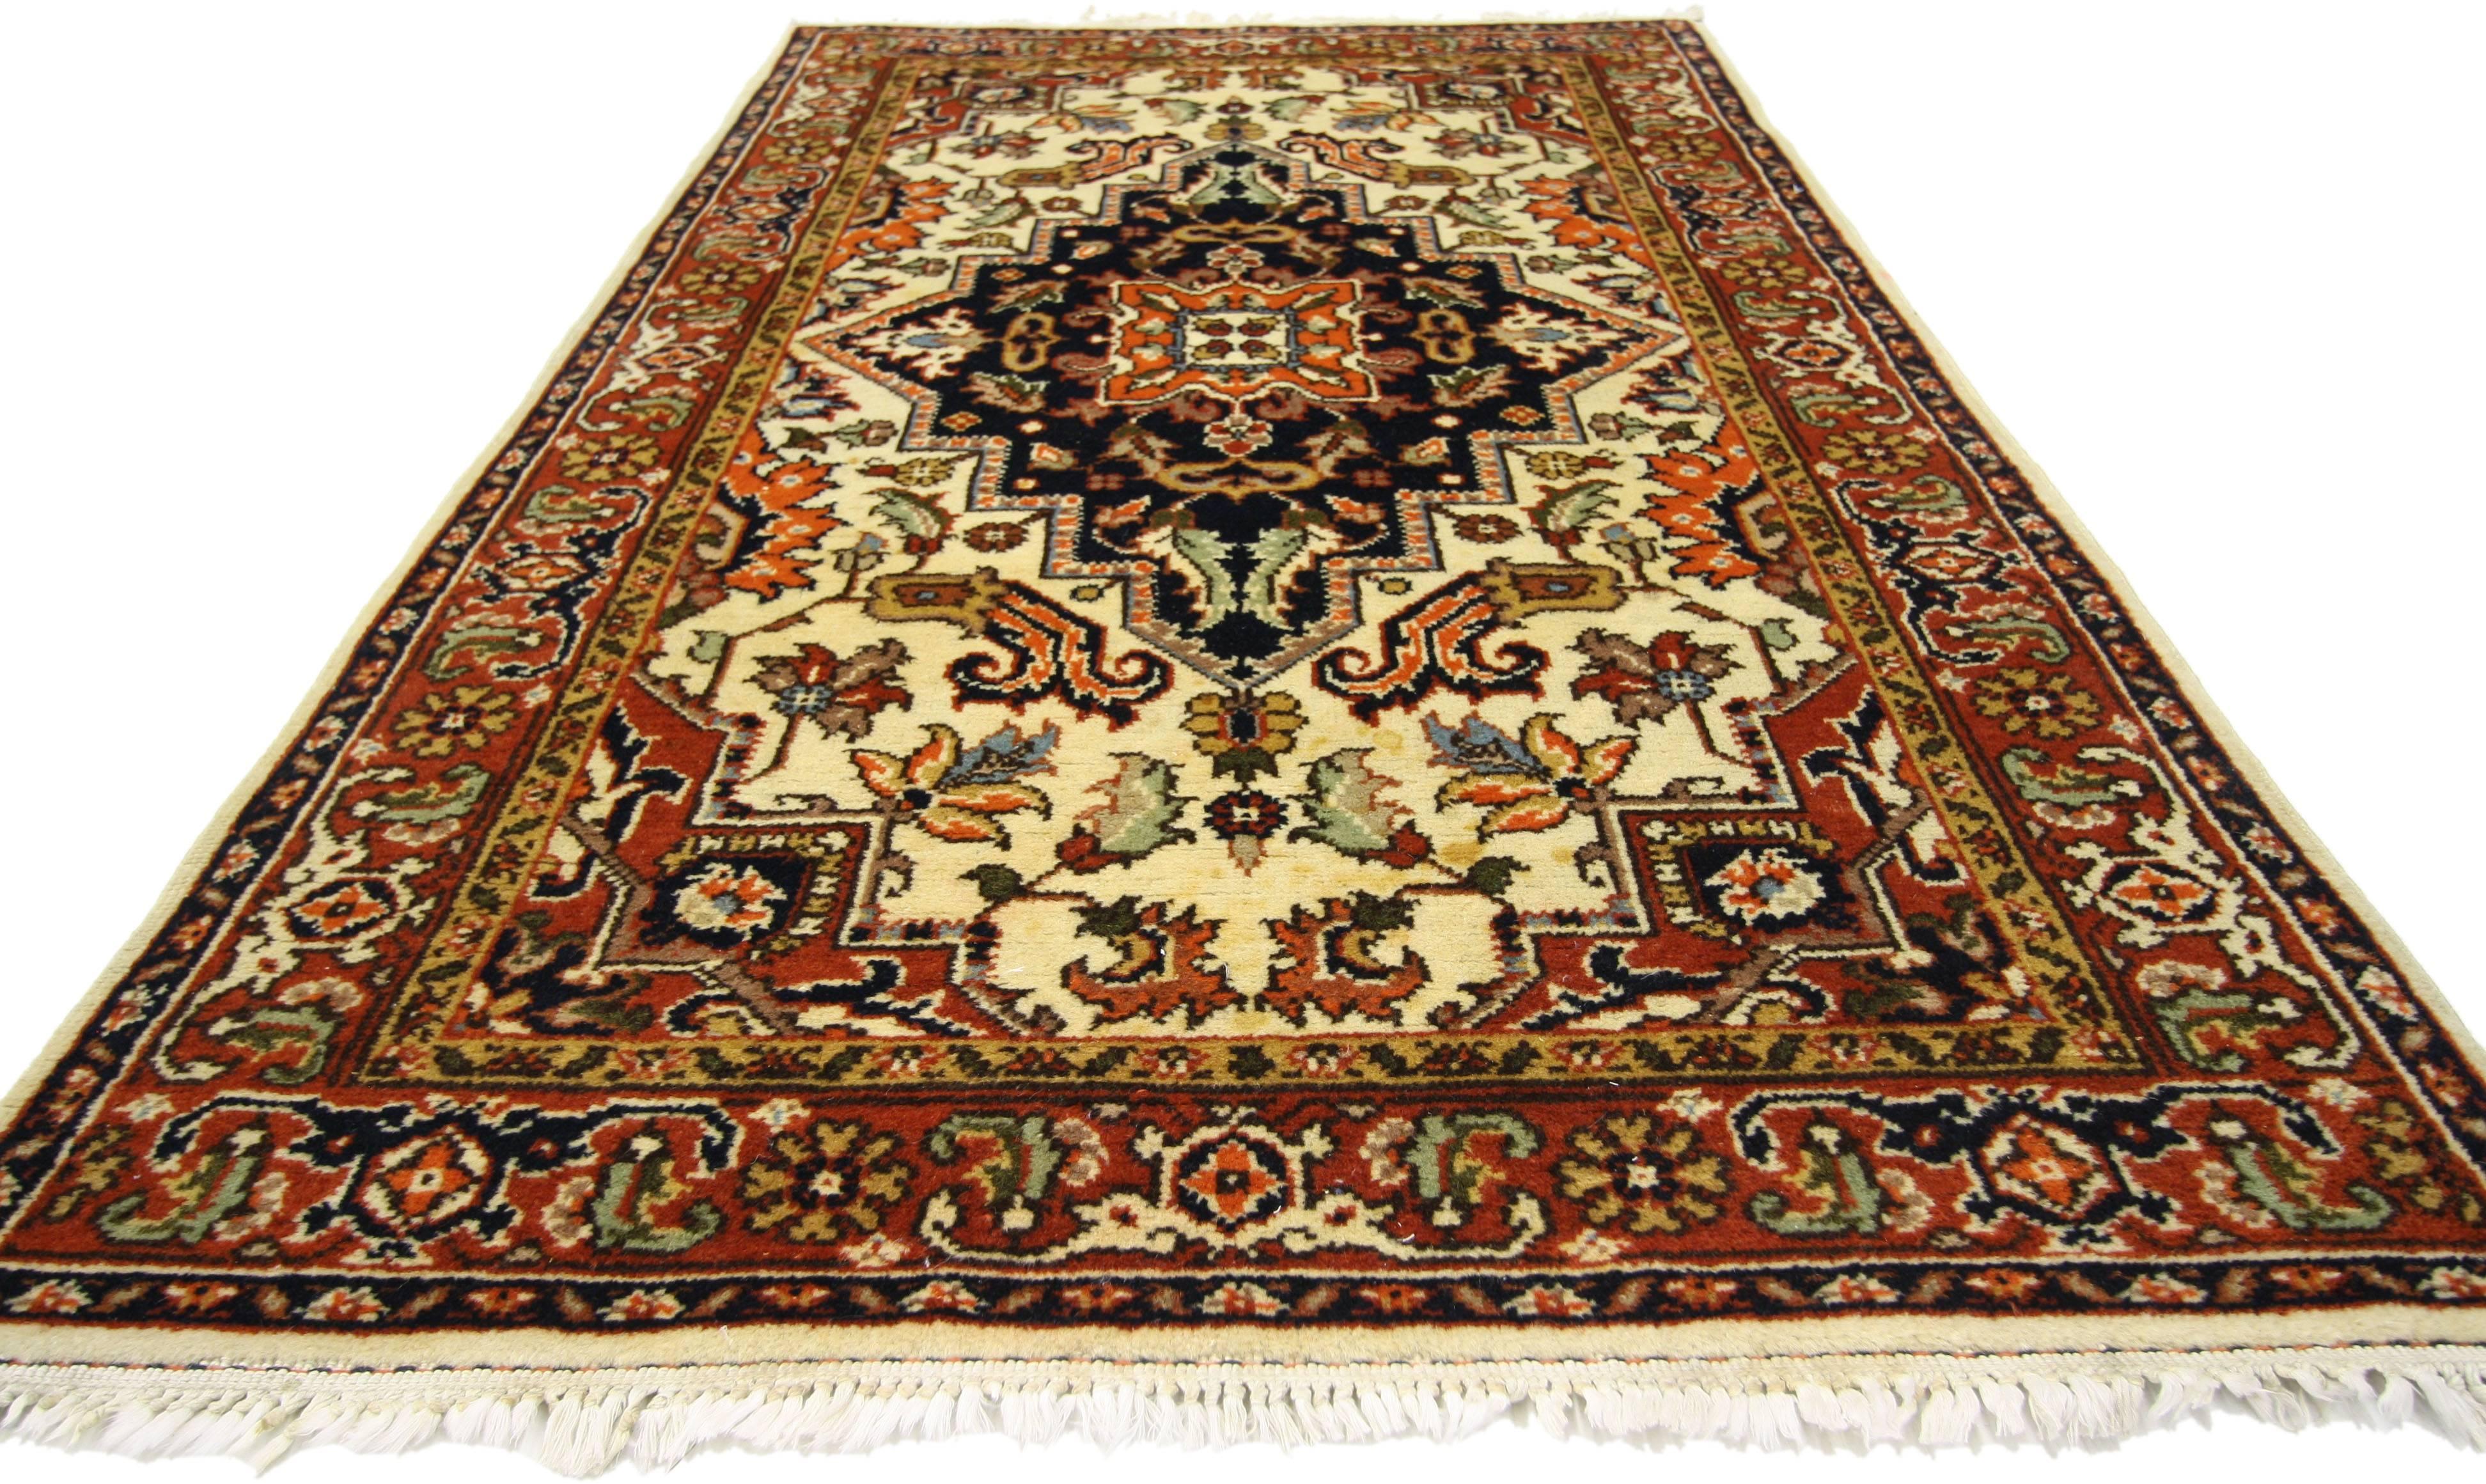 77148, vintage Romanian accent rug with rustic style. This hand knotted wool vintage Romanian rug features a large stepped amulet lozenge medallion with a deep, dark backdrop. The stepped medallion sits against a creamy-beige color field replete